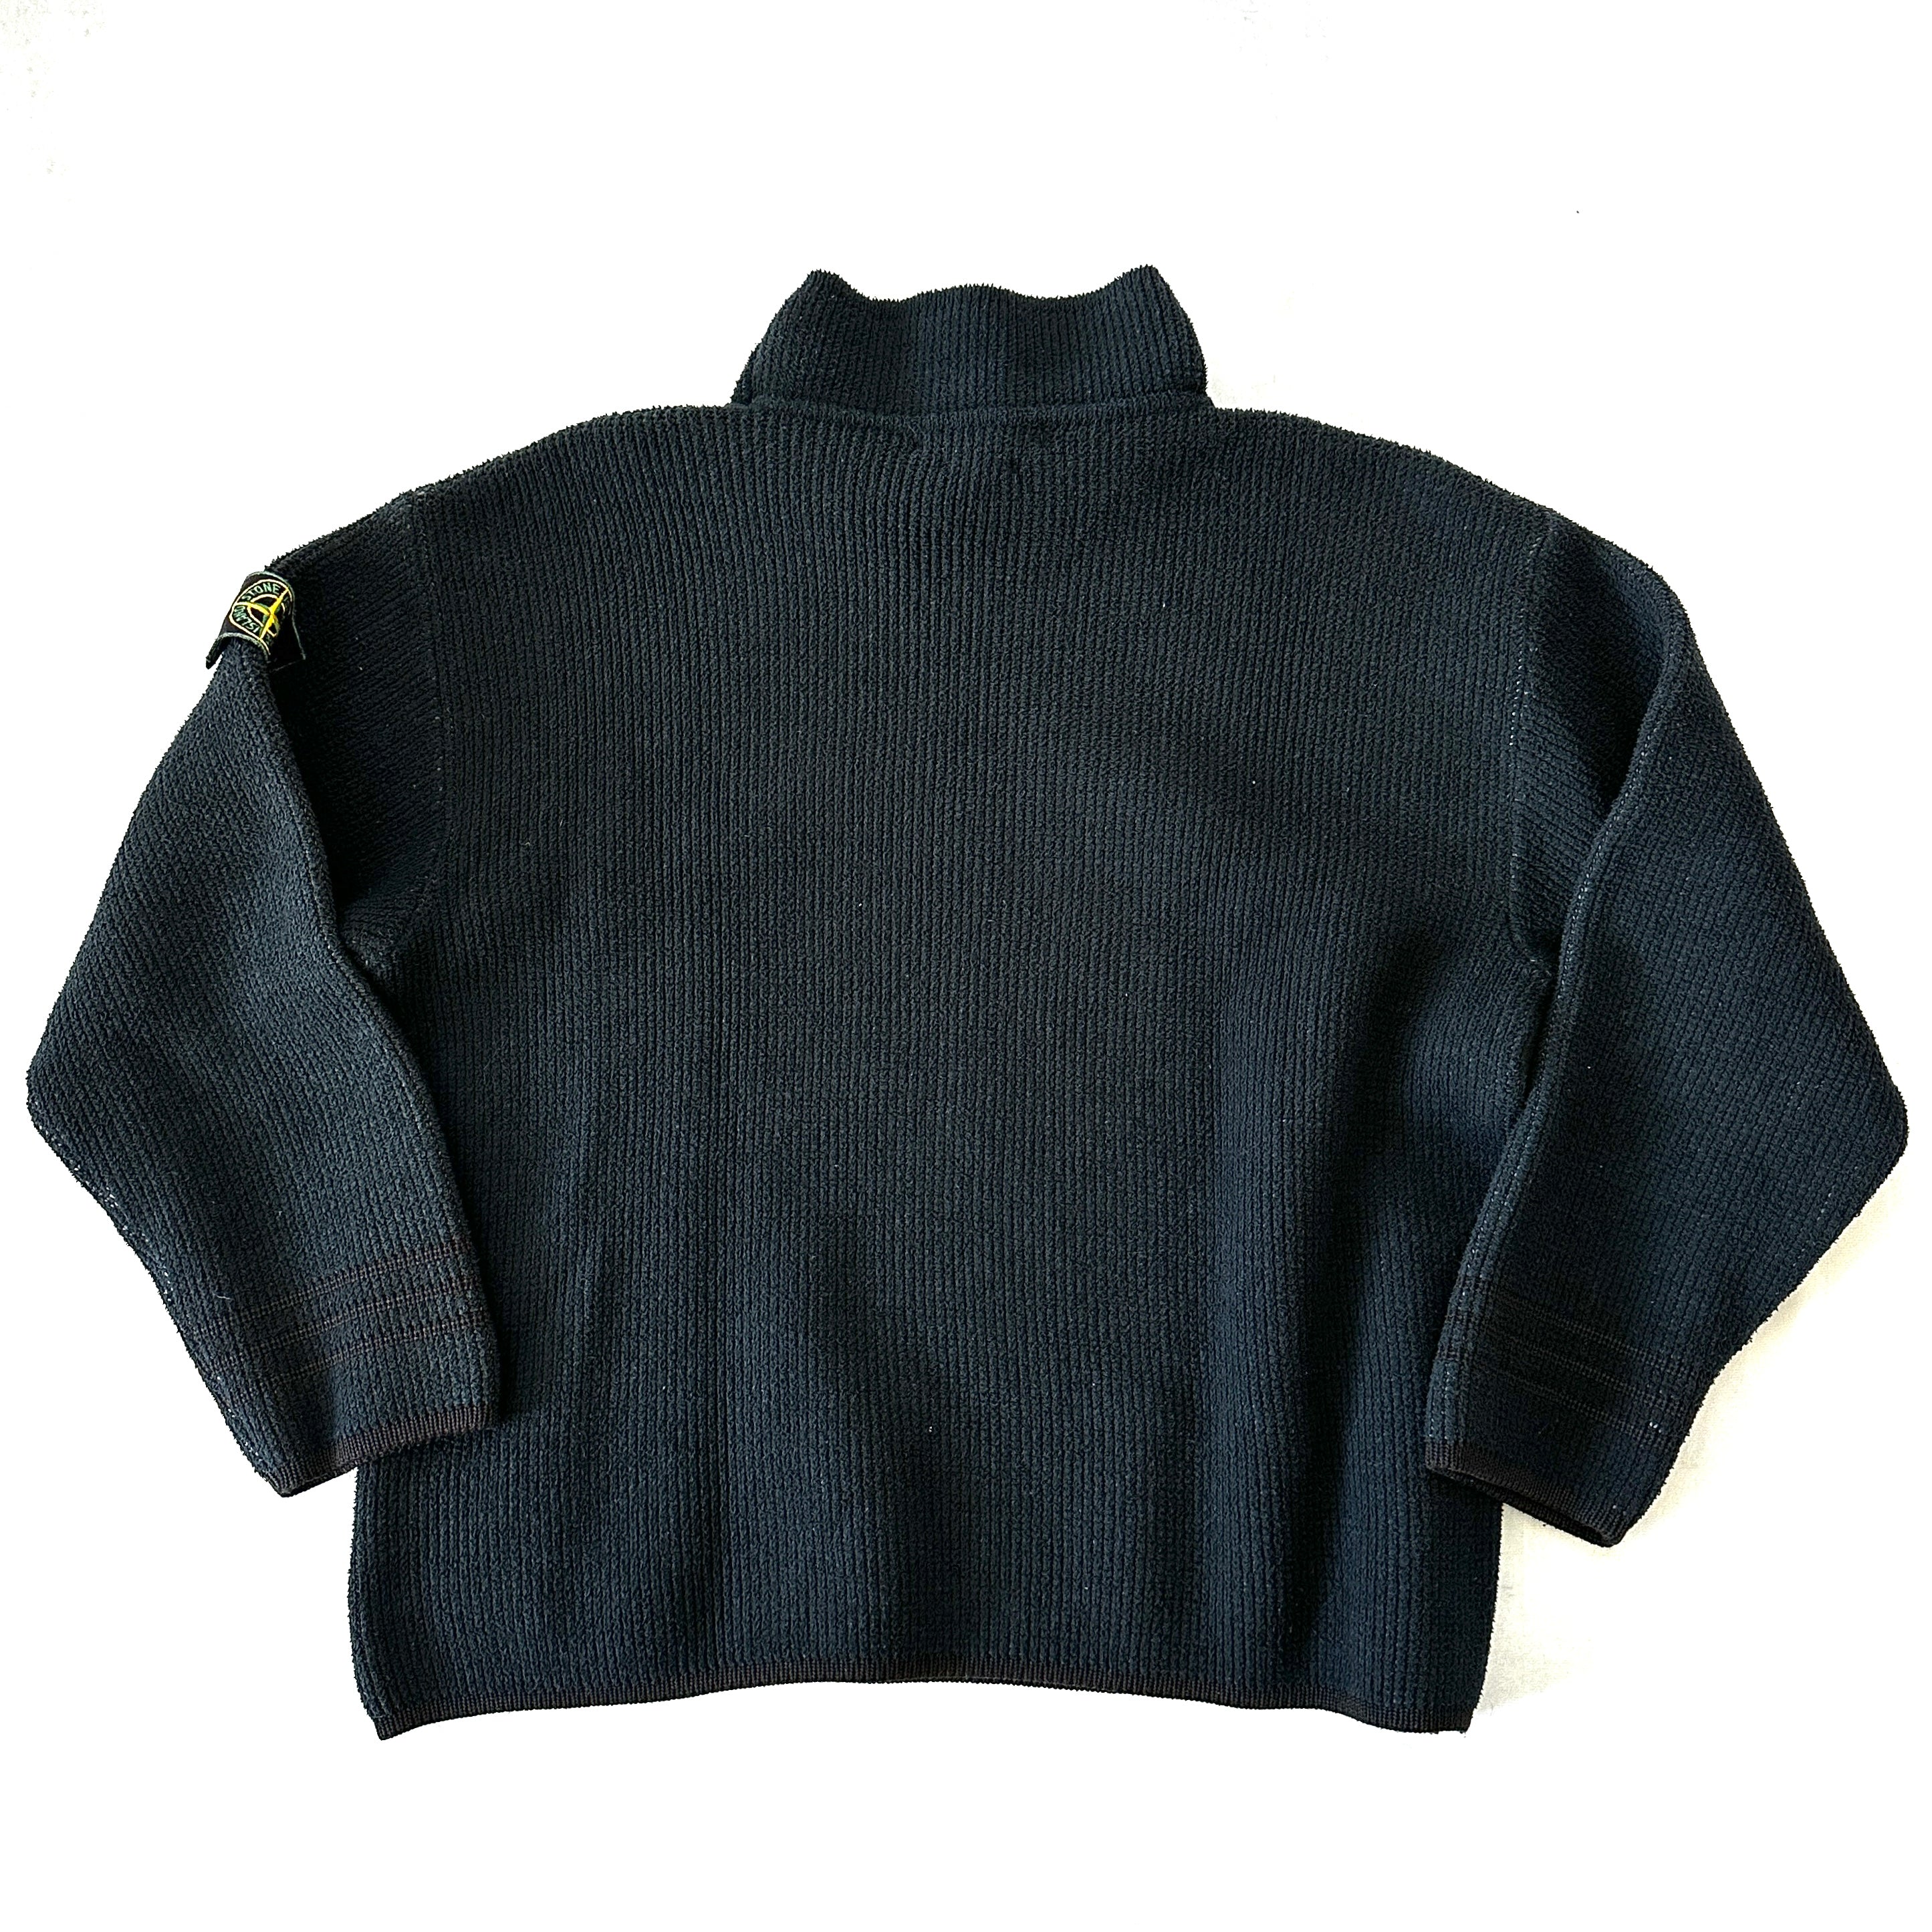 Stone Island 1998 Vintage Turtleneck Knit Sweater - XL - Made in Italy